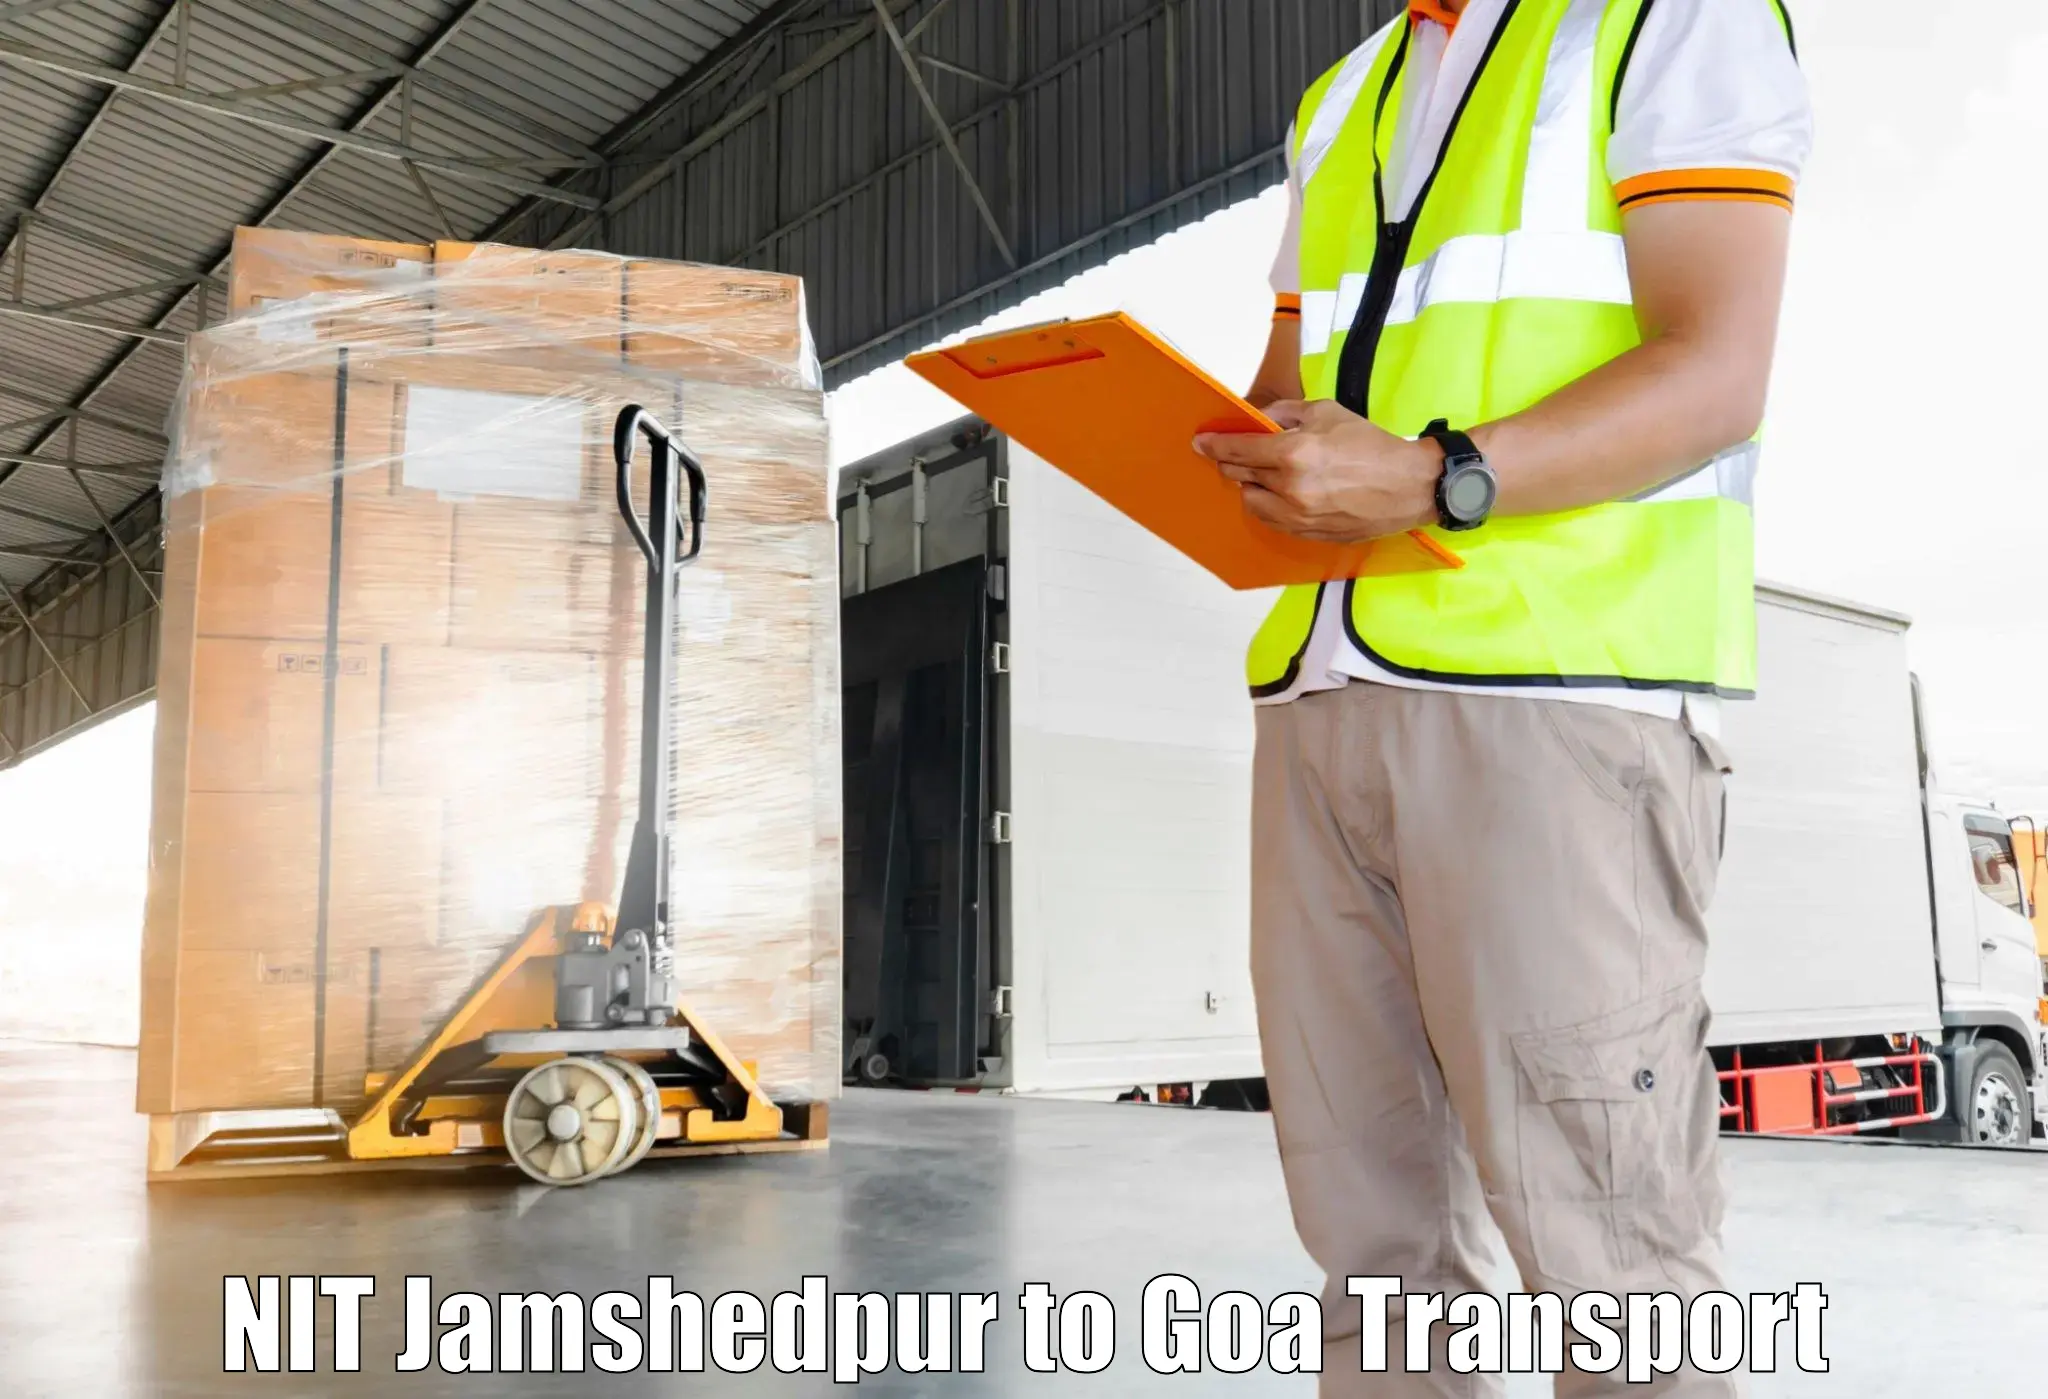 Nearby transport service NIT Jamshedpur to Goa